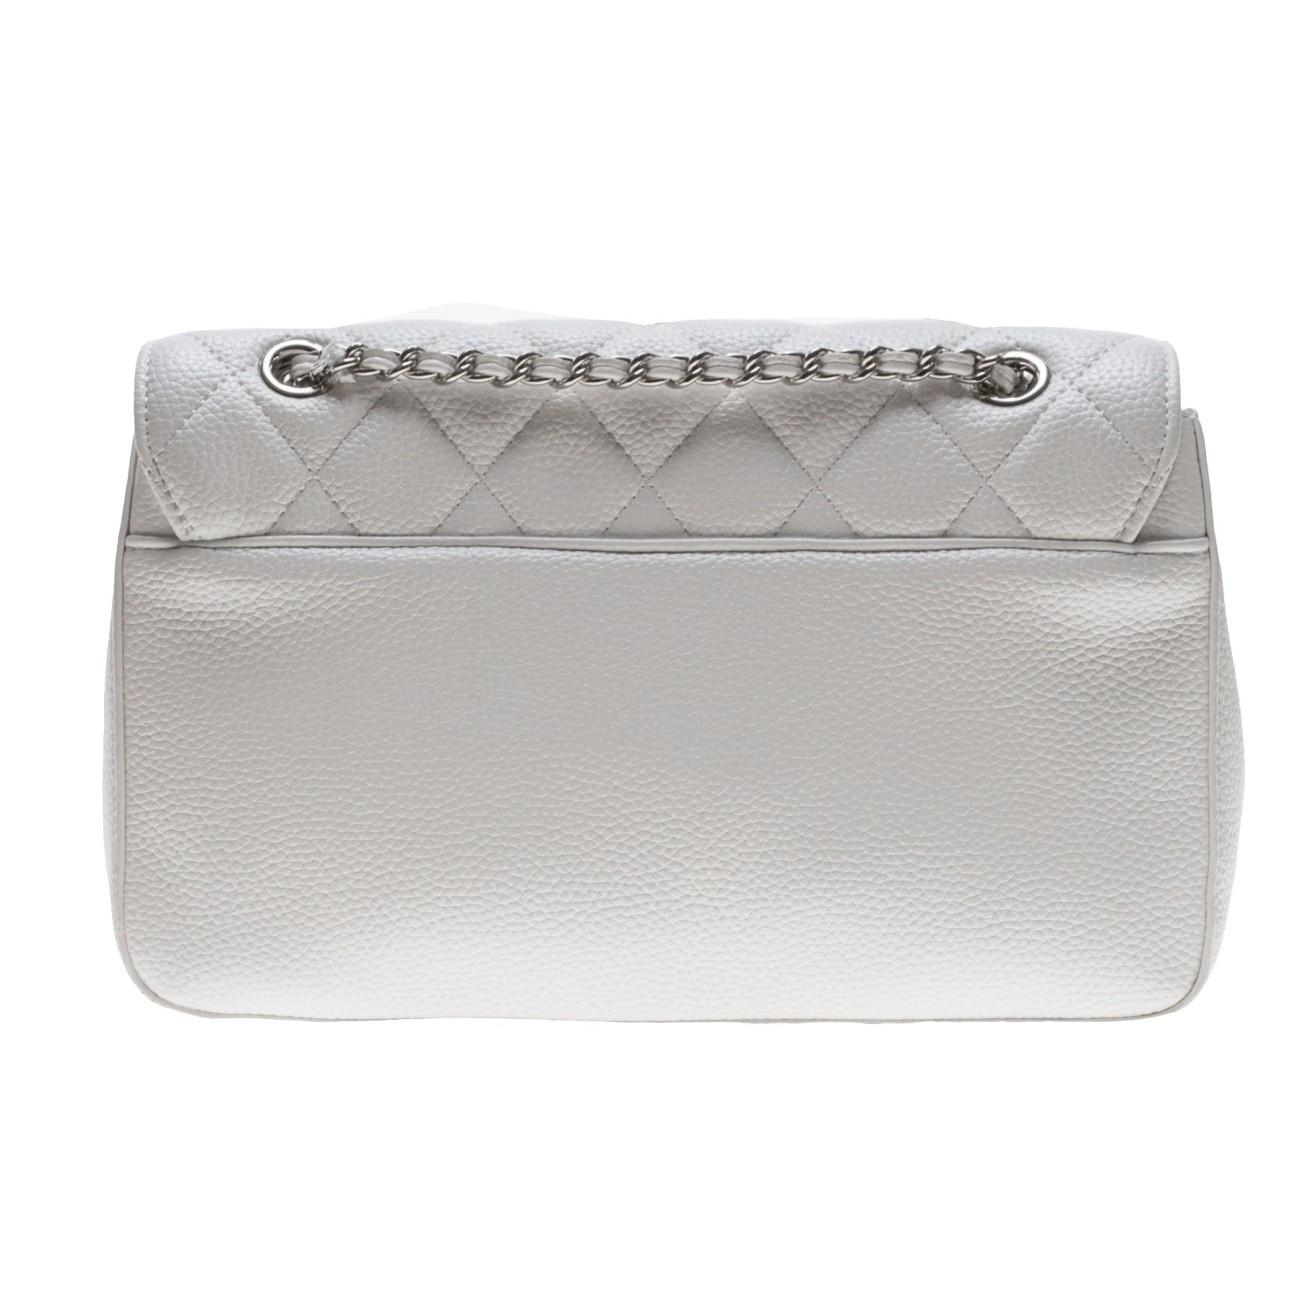 Gaelle white quilted...